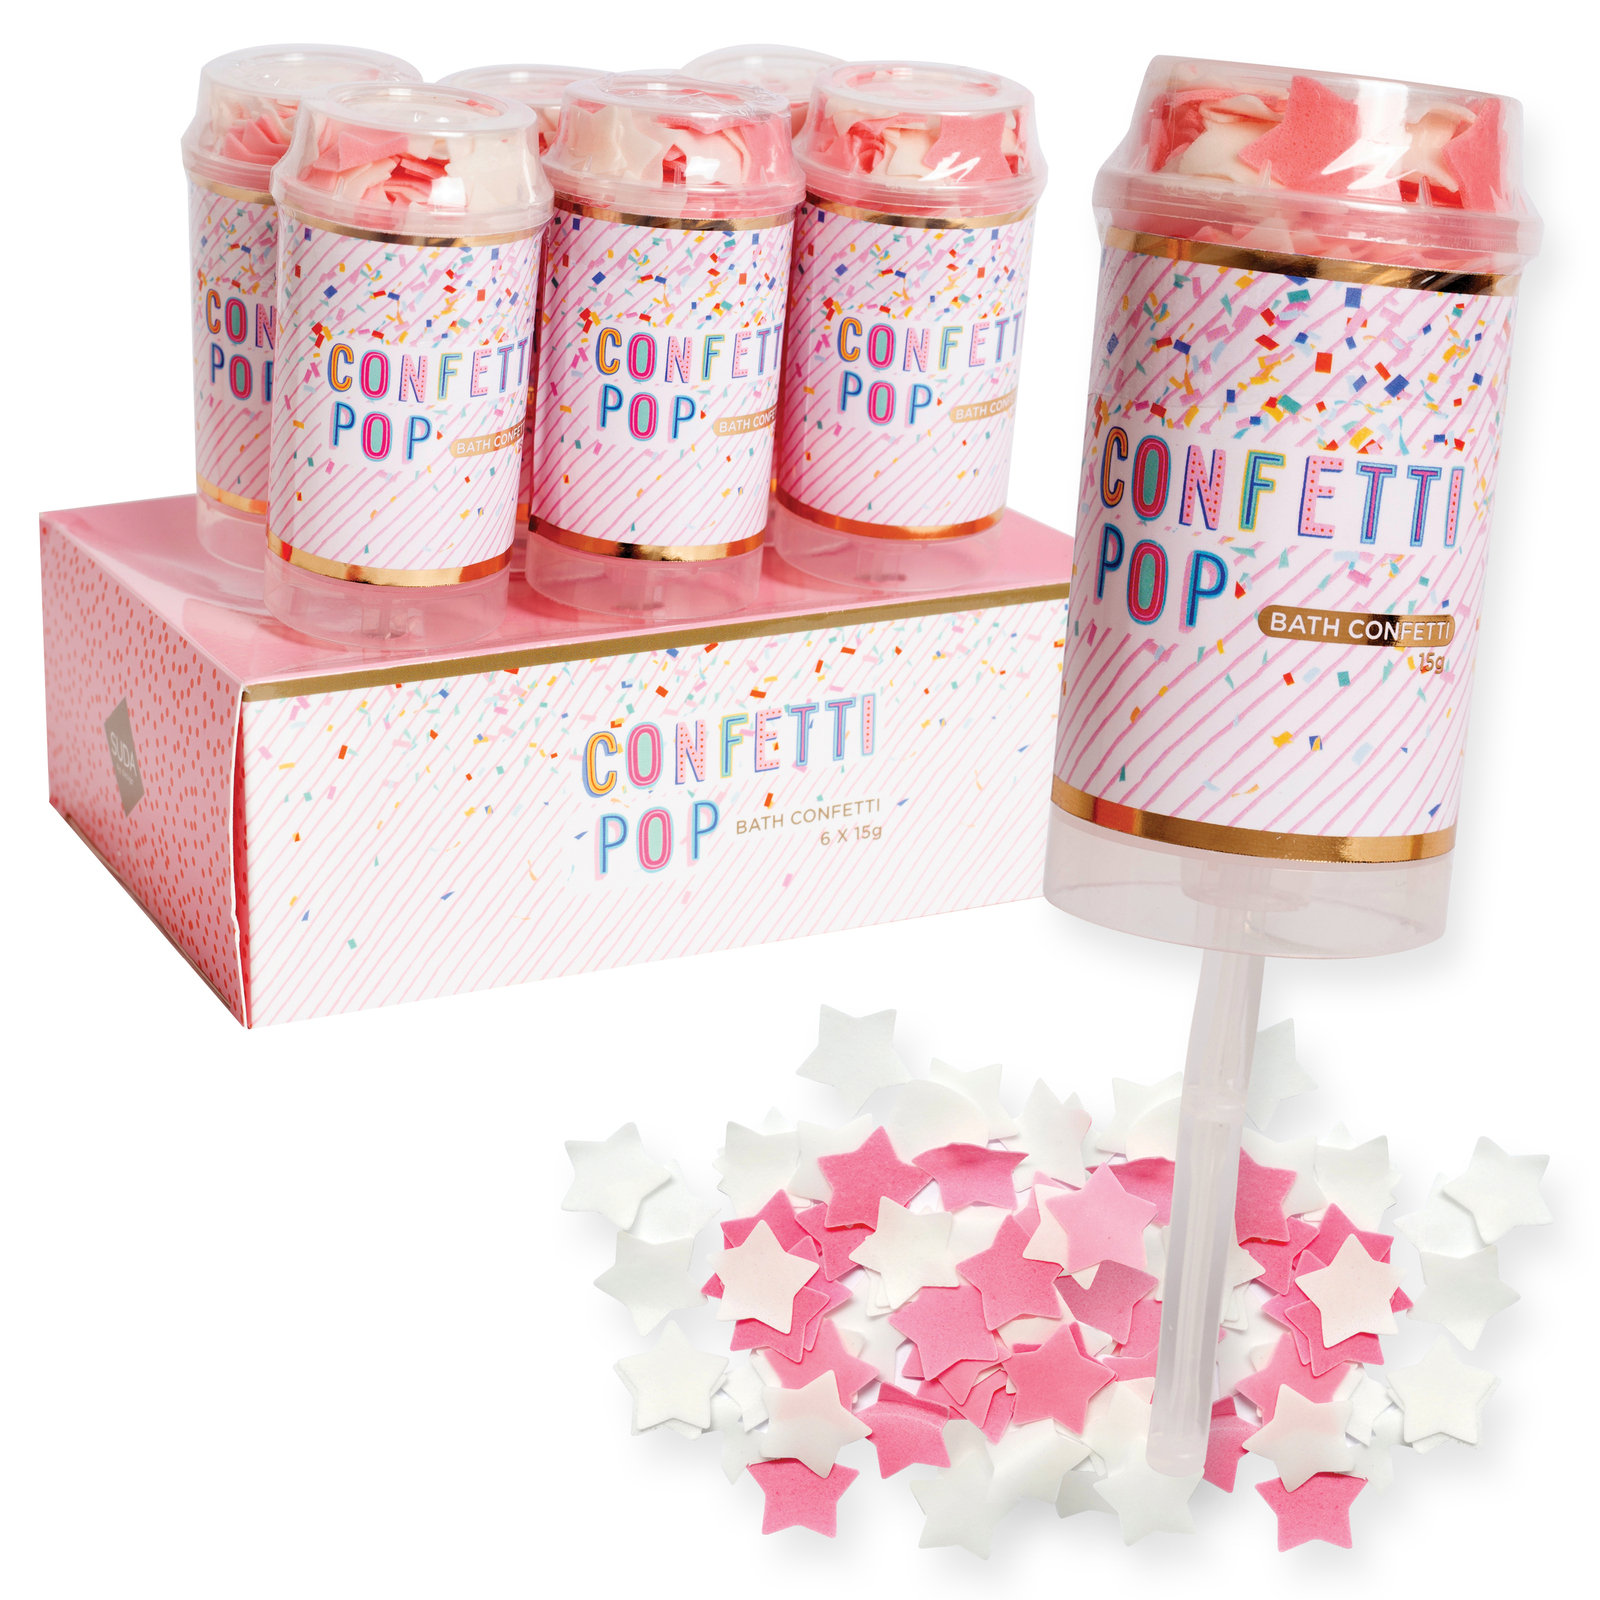 New Confetti Pop - Pack of 6 ($1.80 ea)